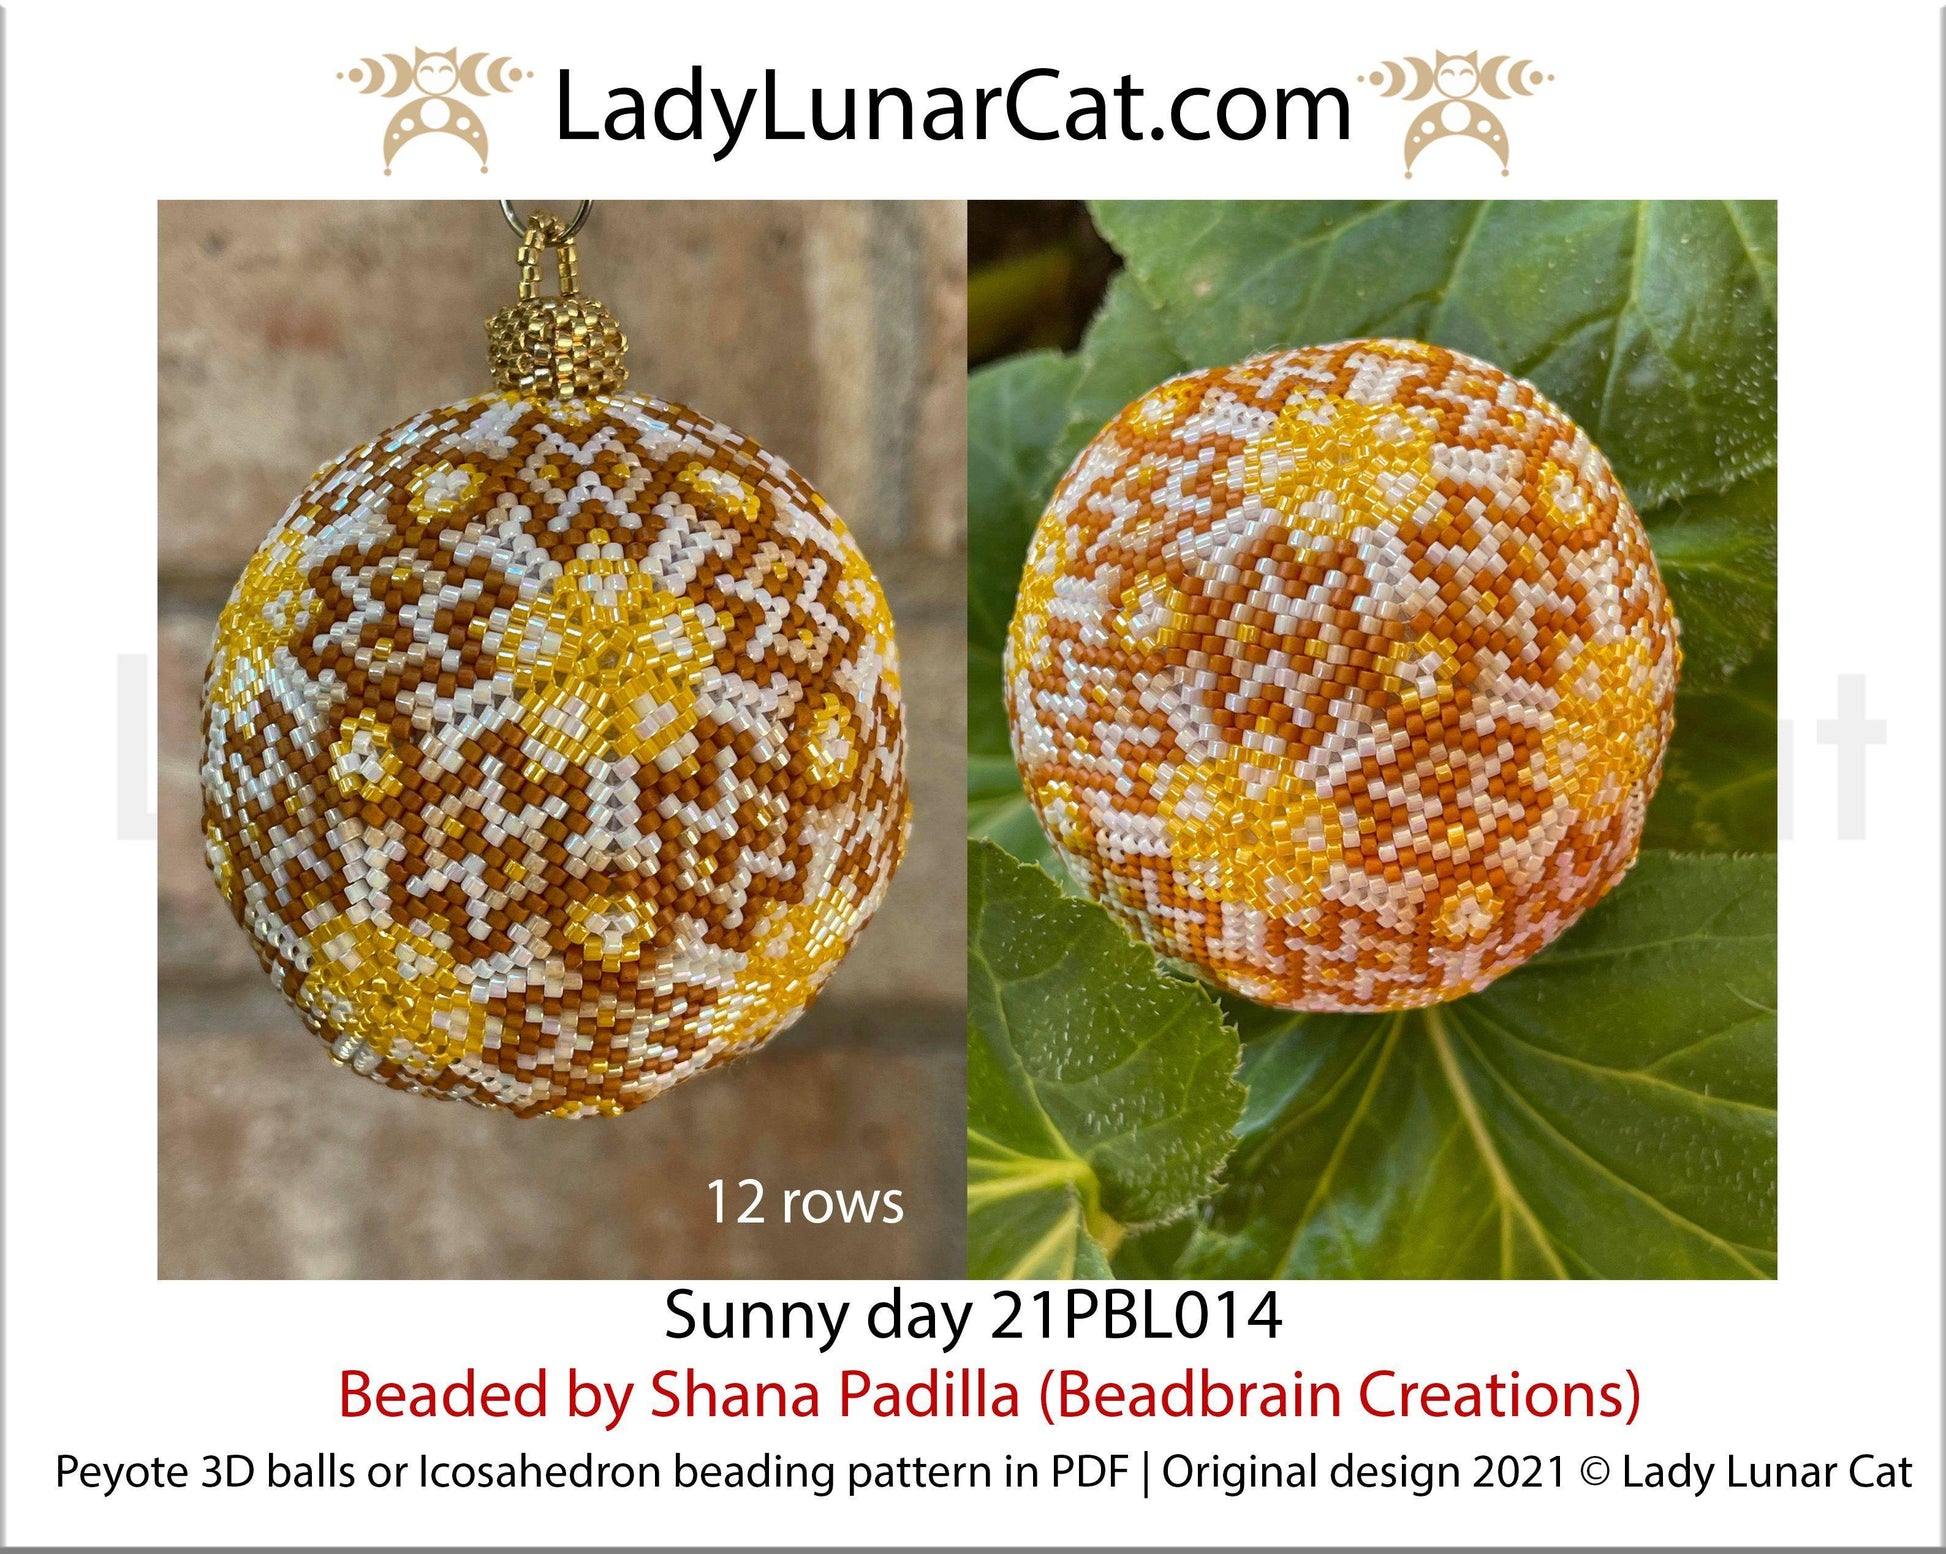 Peyote 3d ball pattern for beading | Beaded Icosahedron Sunny day 21PBL014 12 rows LadyLunarCat